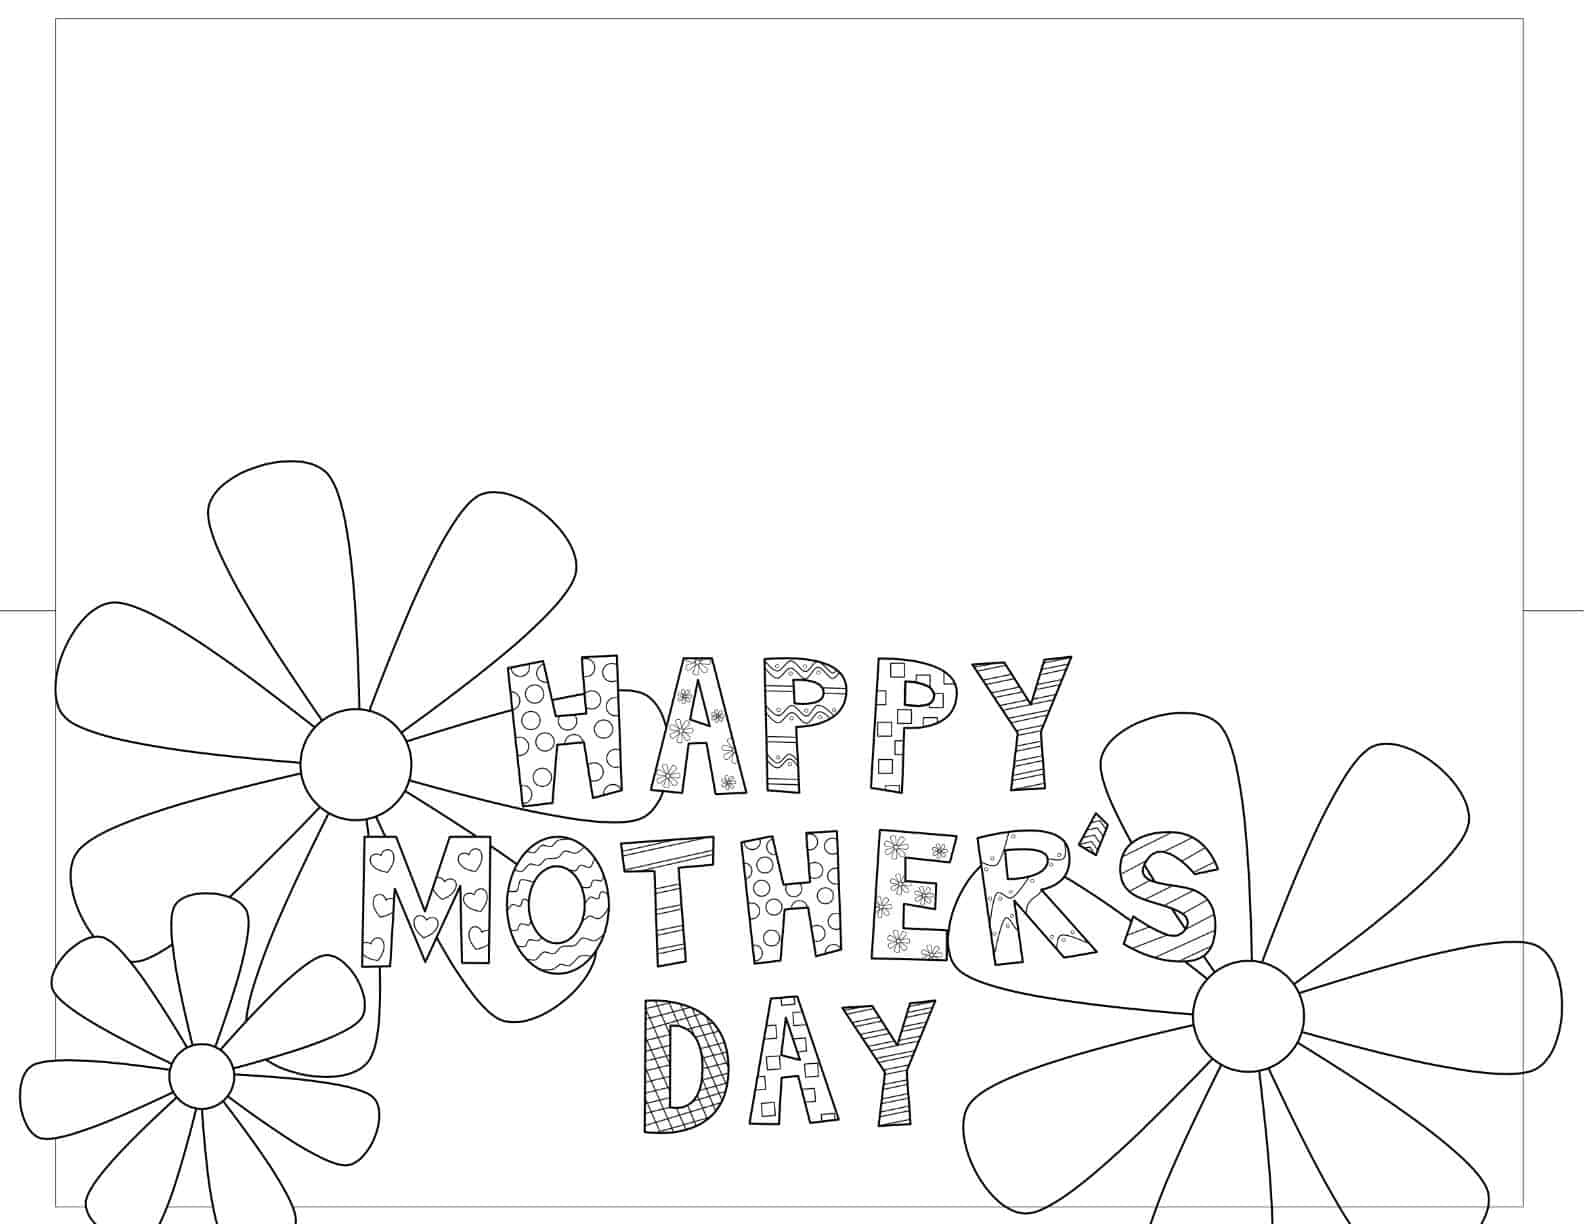 happy-mother-s-day-free-printable-card-to-color-sunshine-and-rainy-days